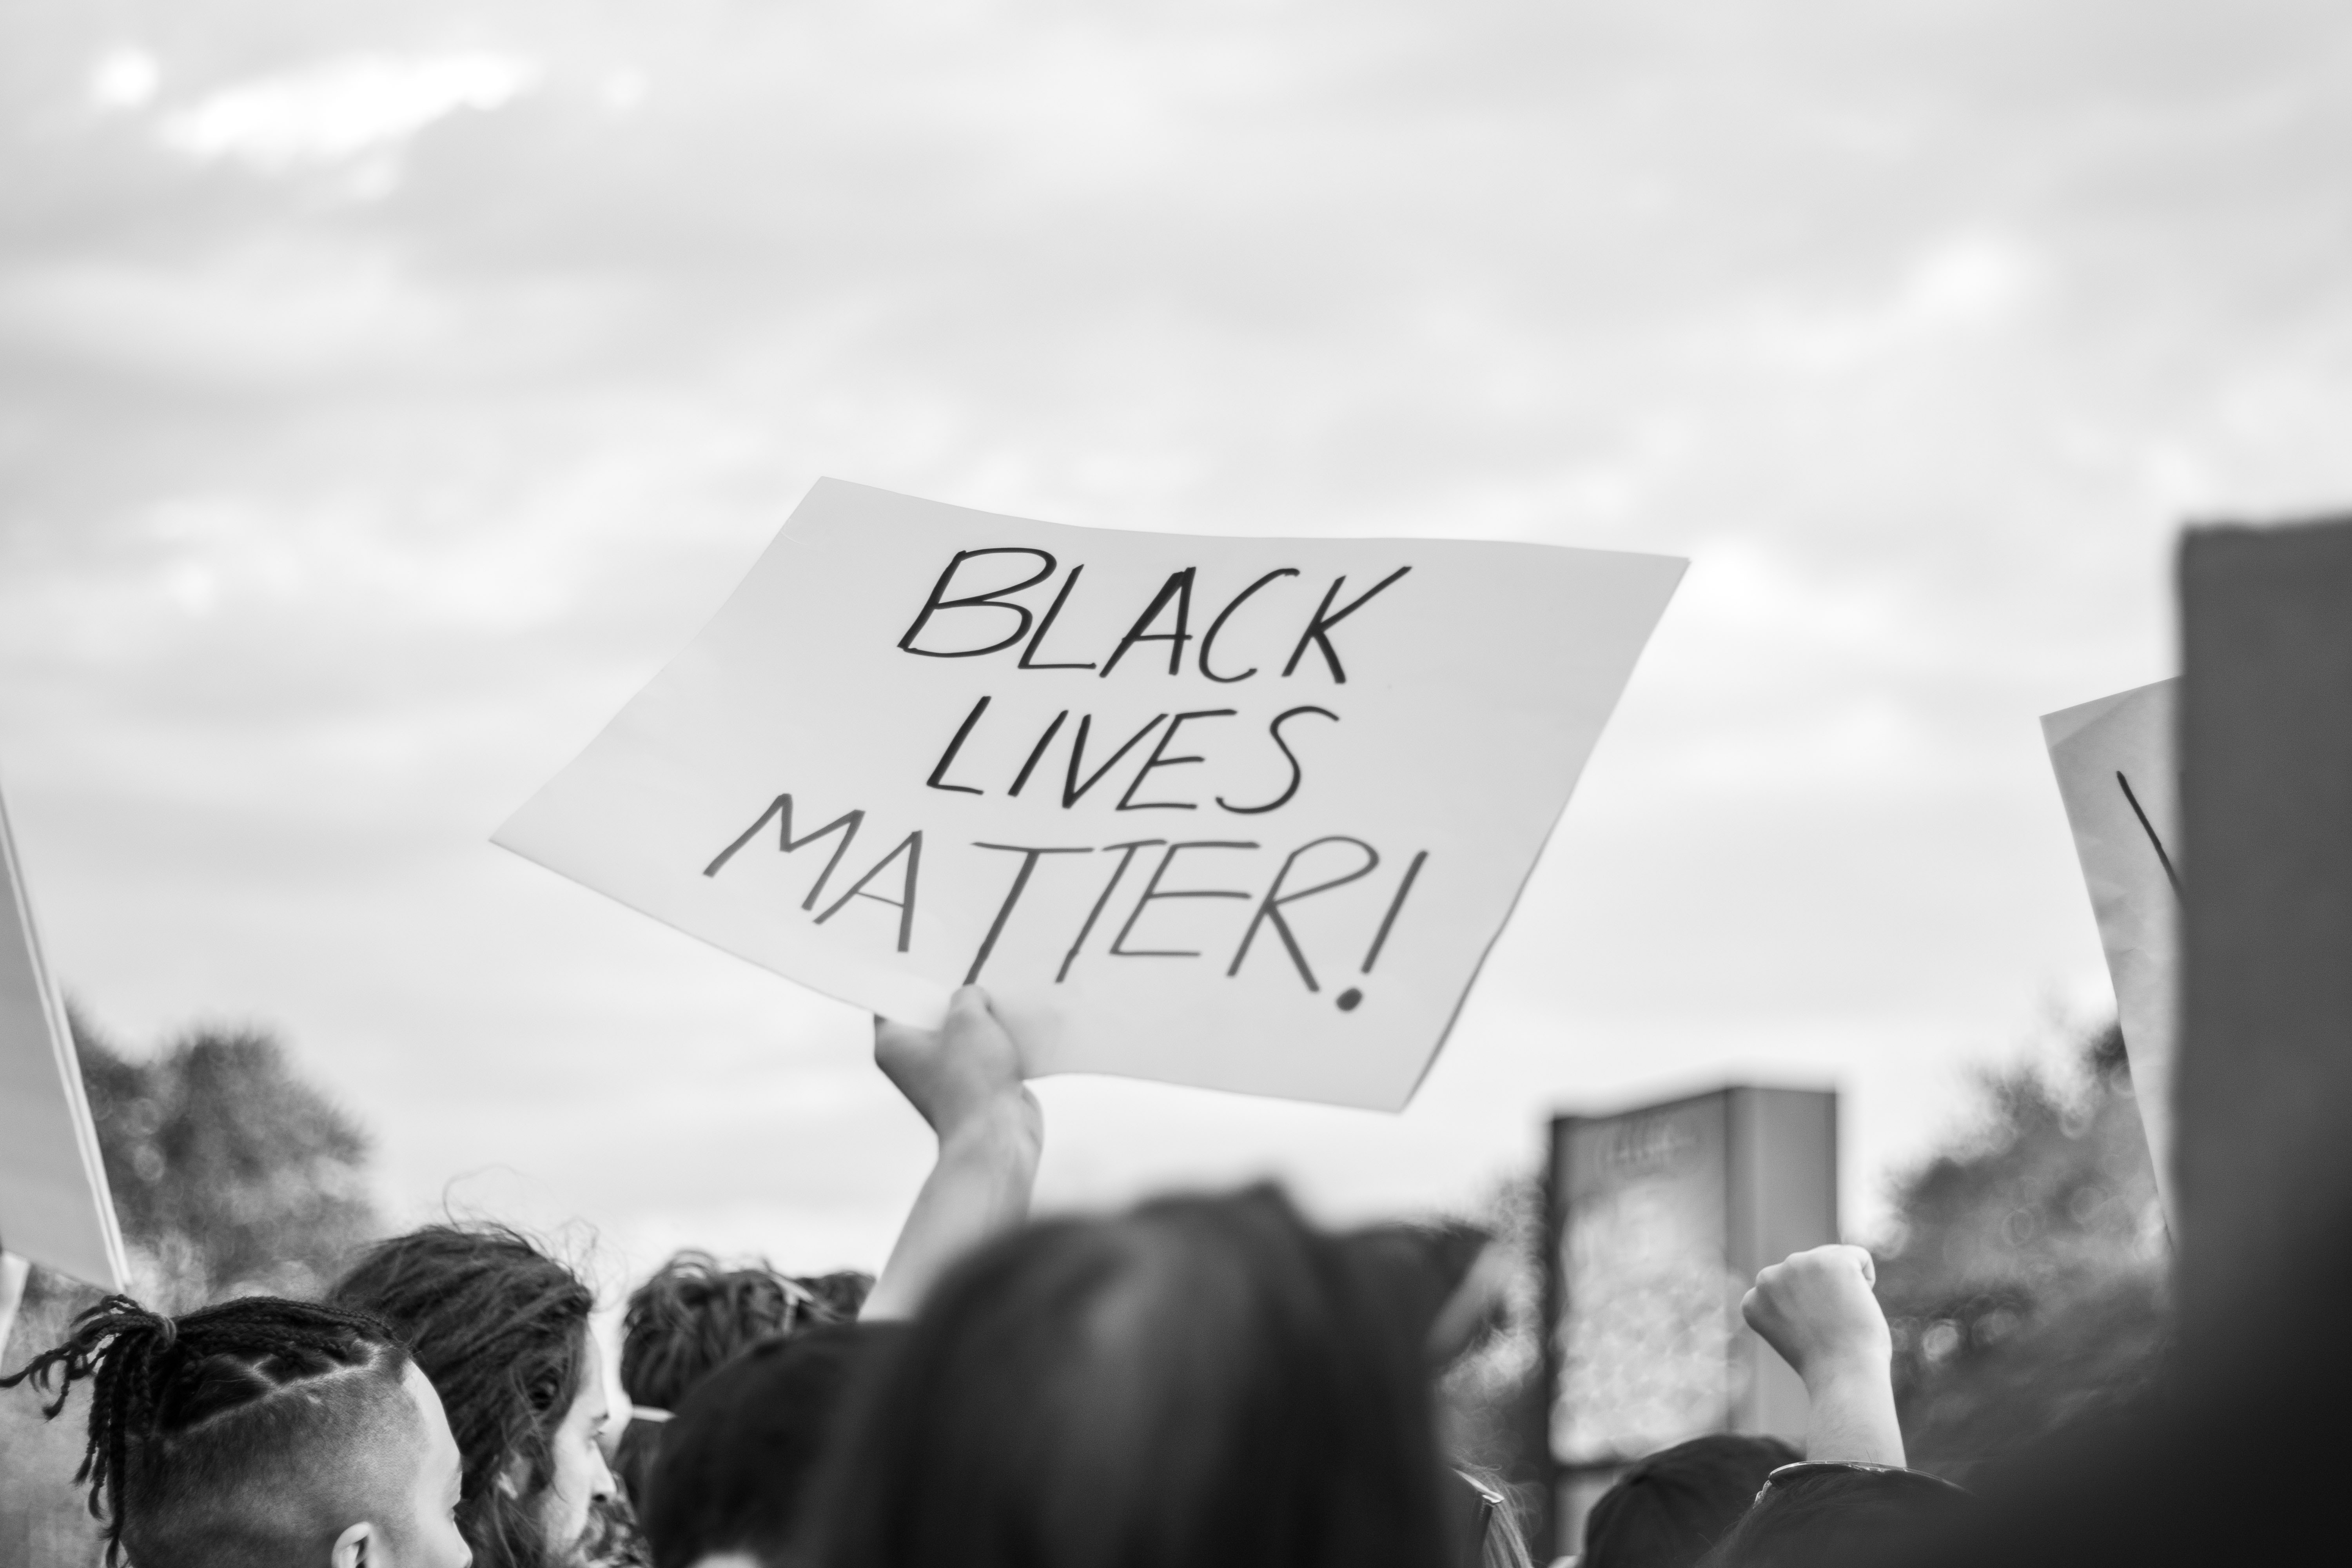 A hand holding up a sign amidst a crowd. The sign reads " Black Lives Matter!"